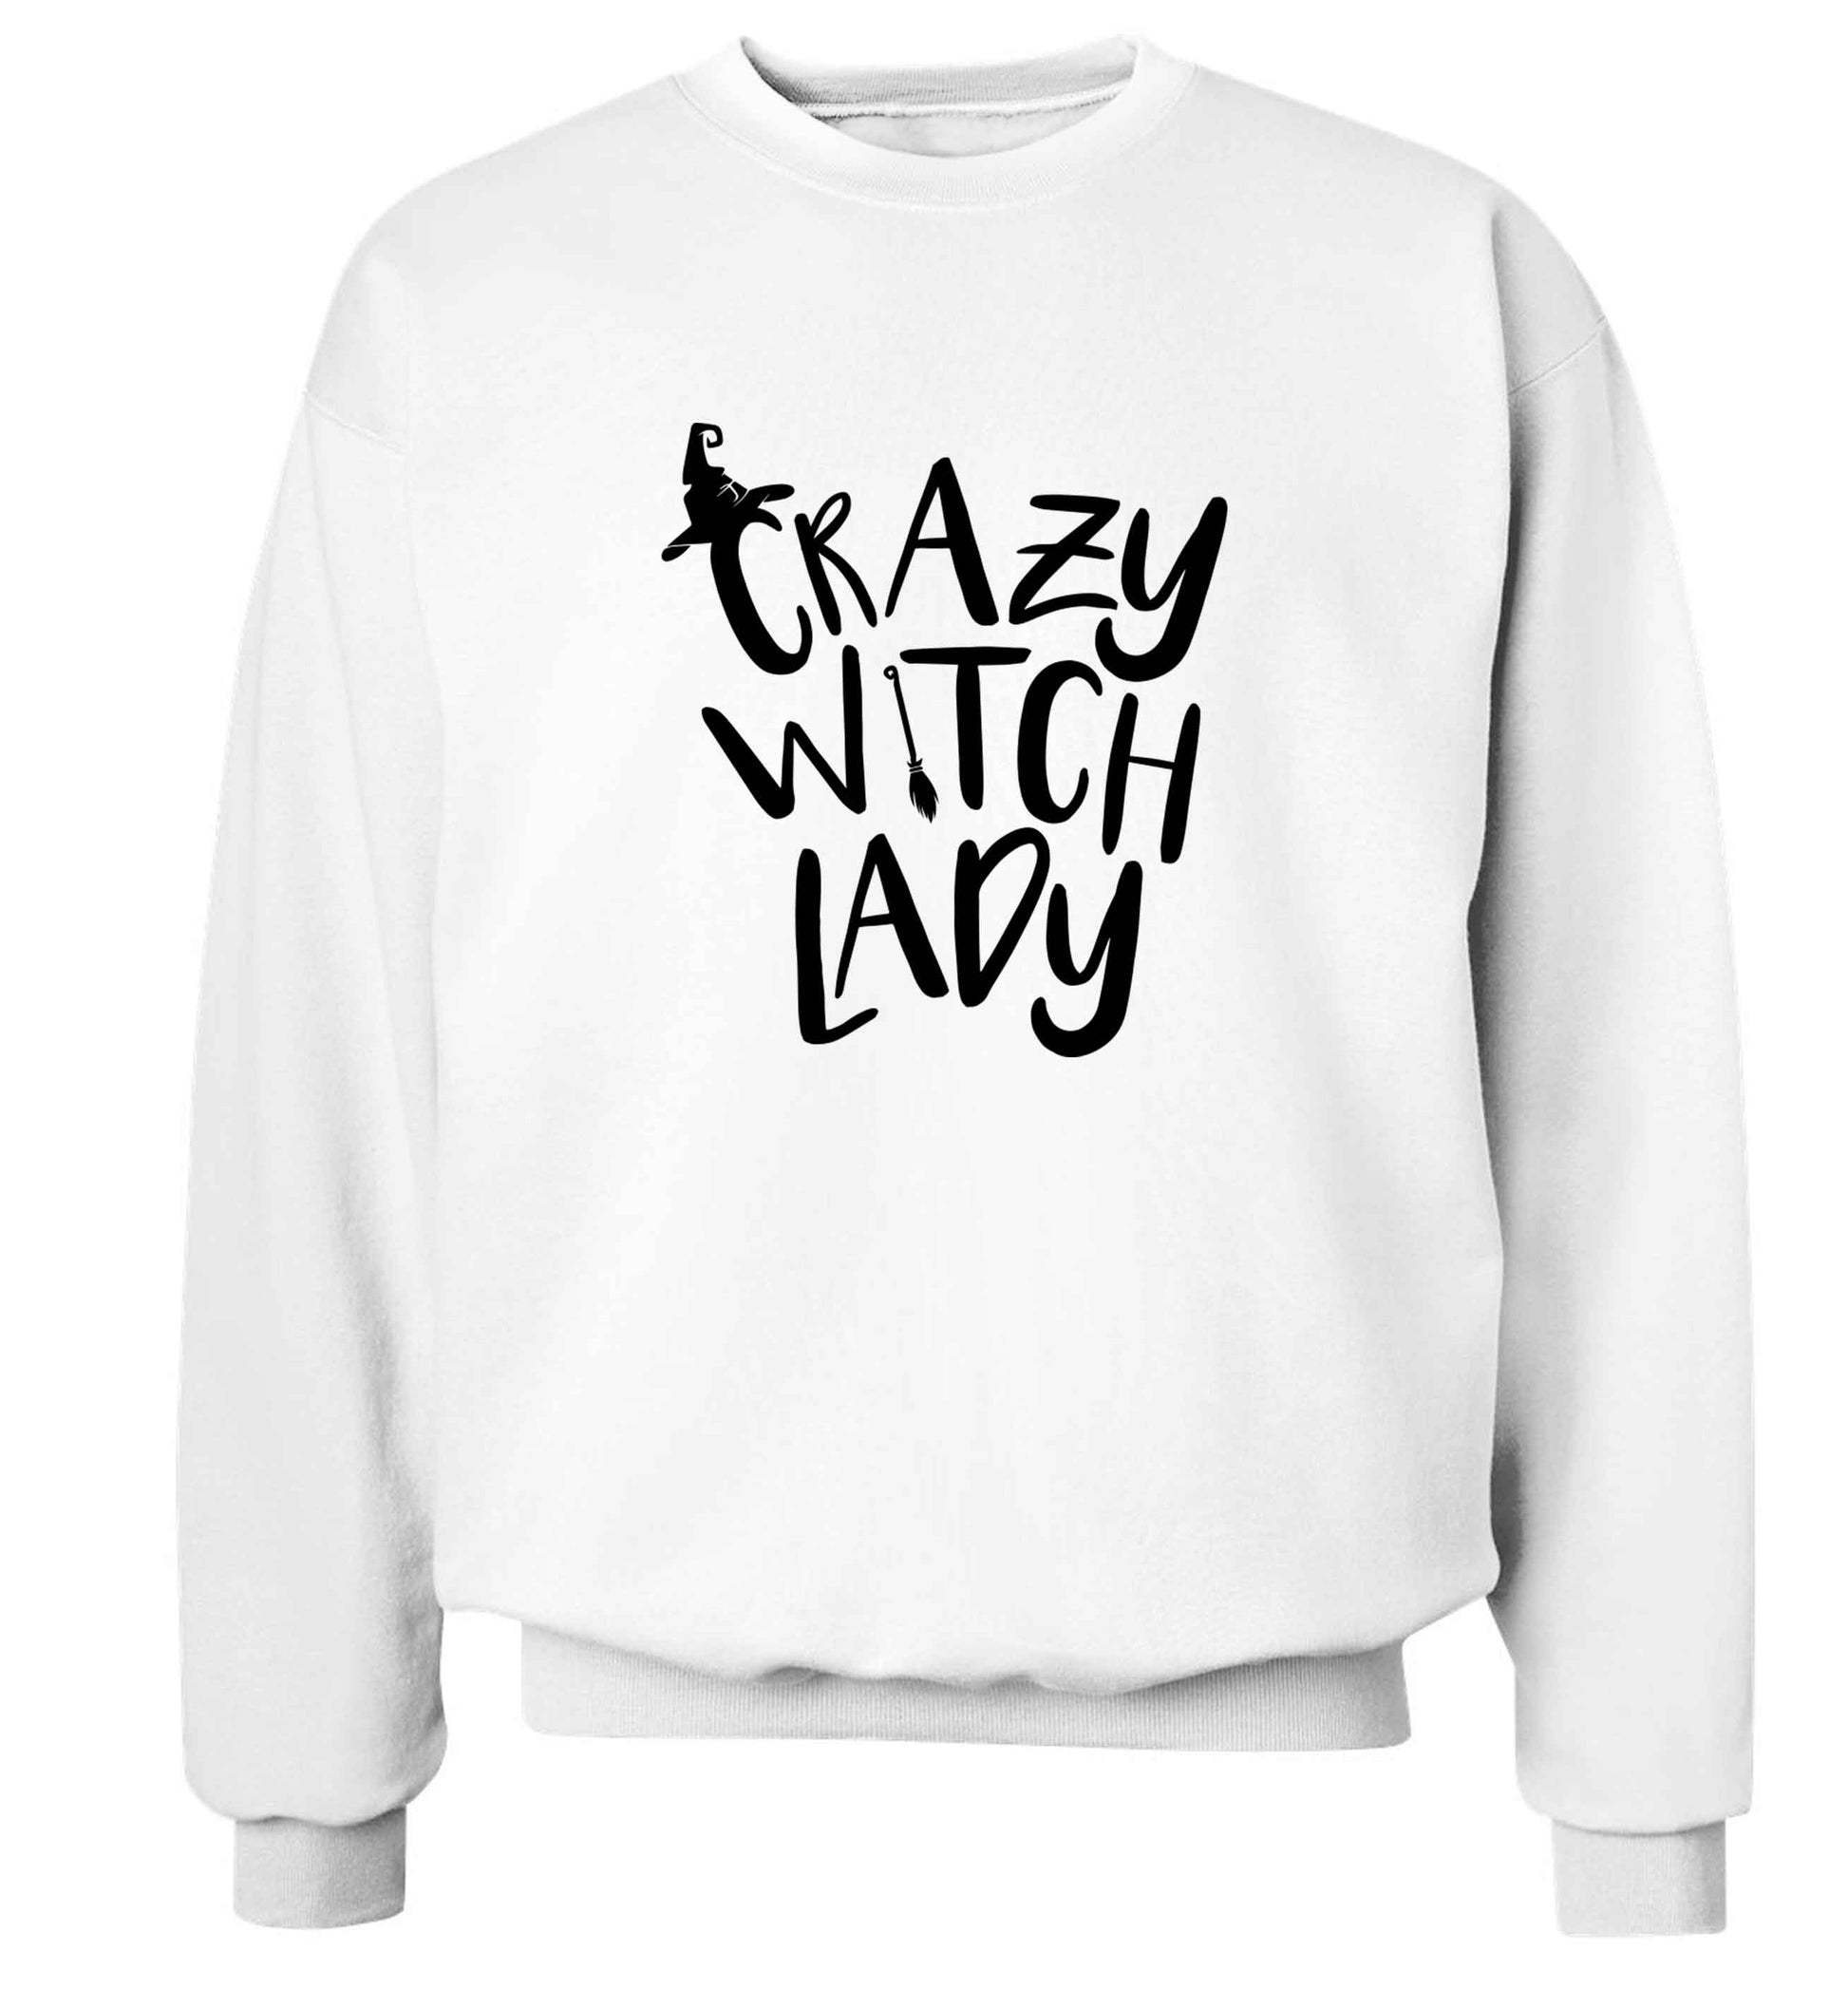 Crazy witch lady adult's unisex white sweater 2XL